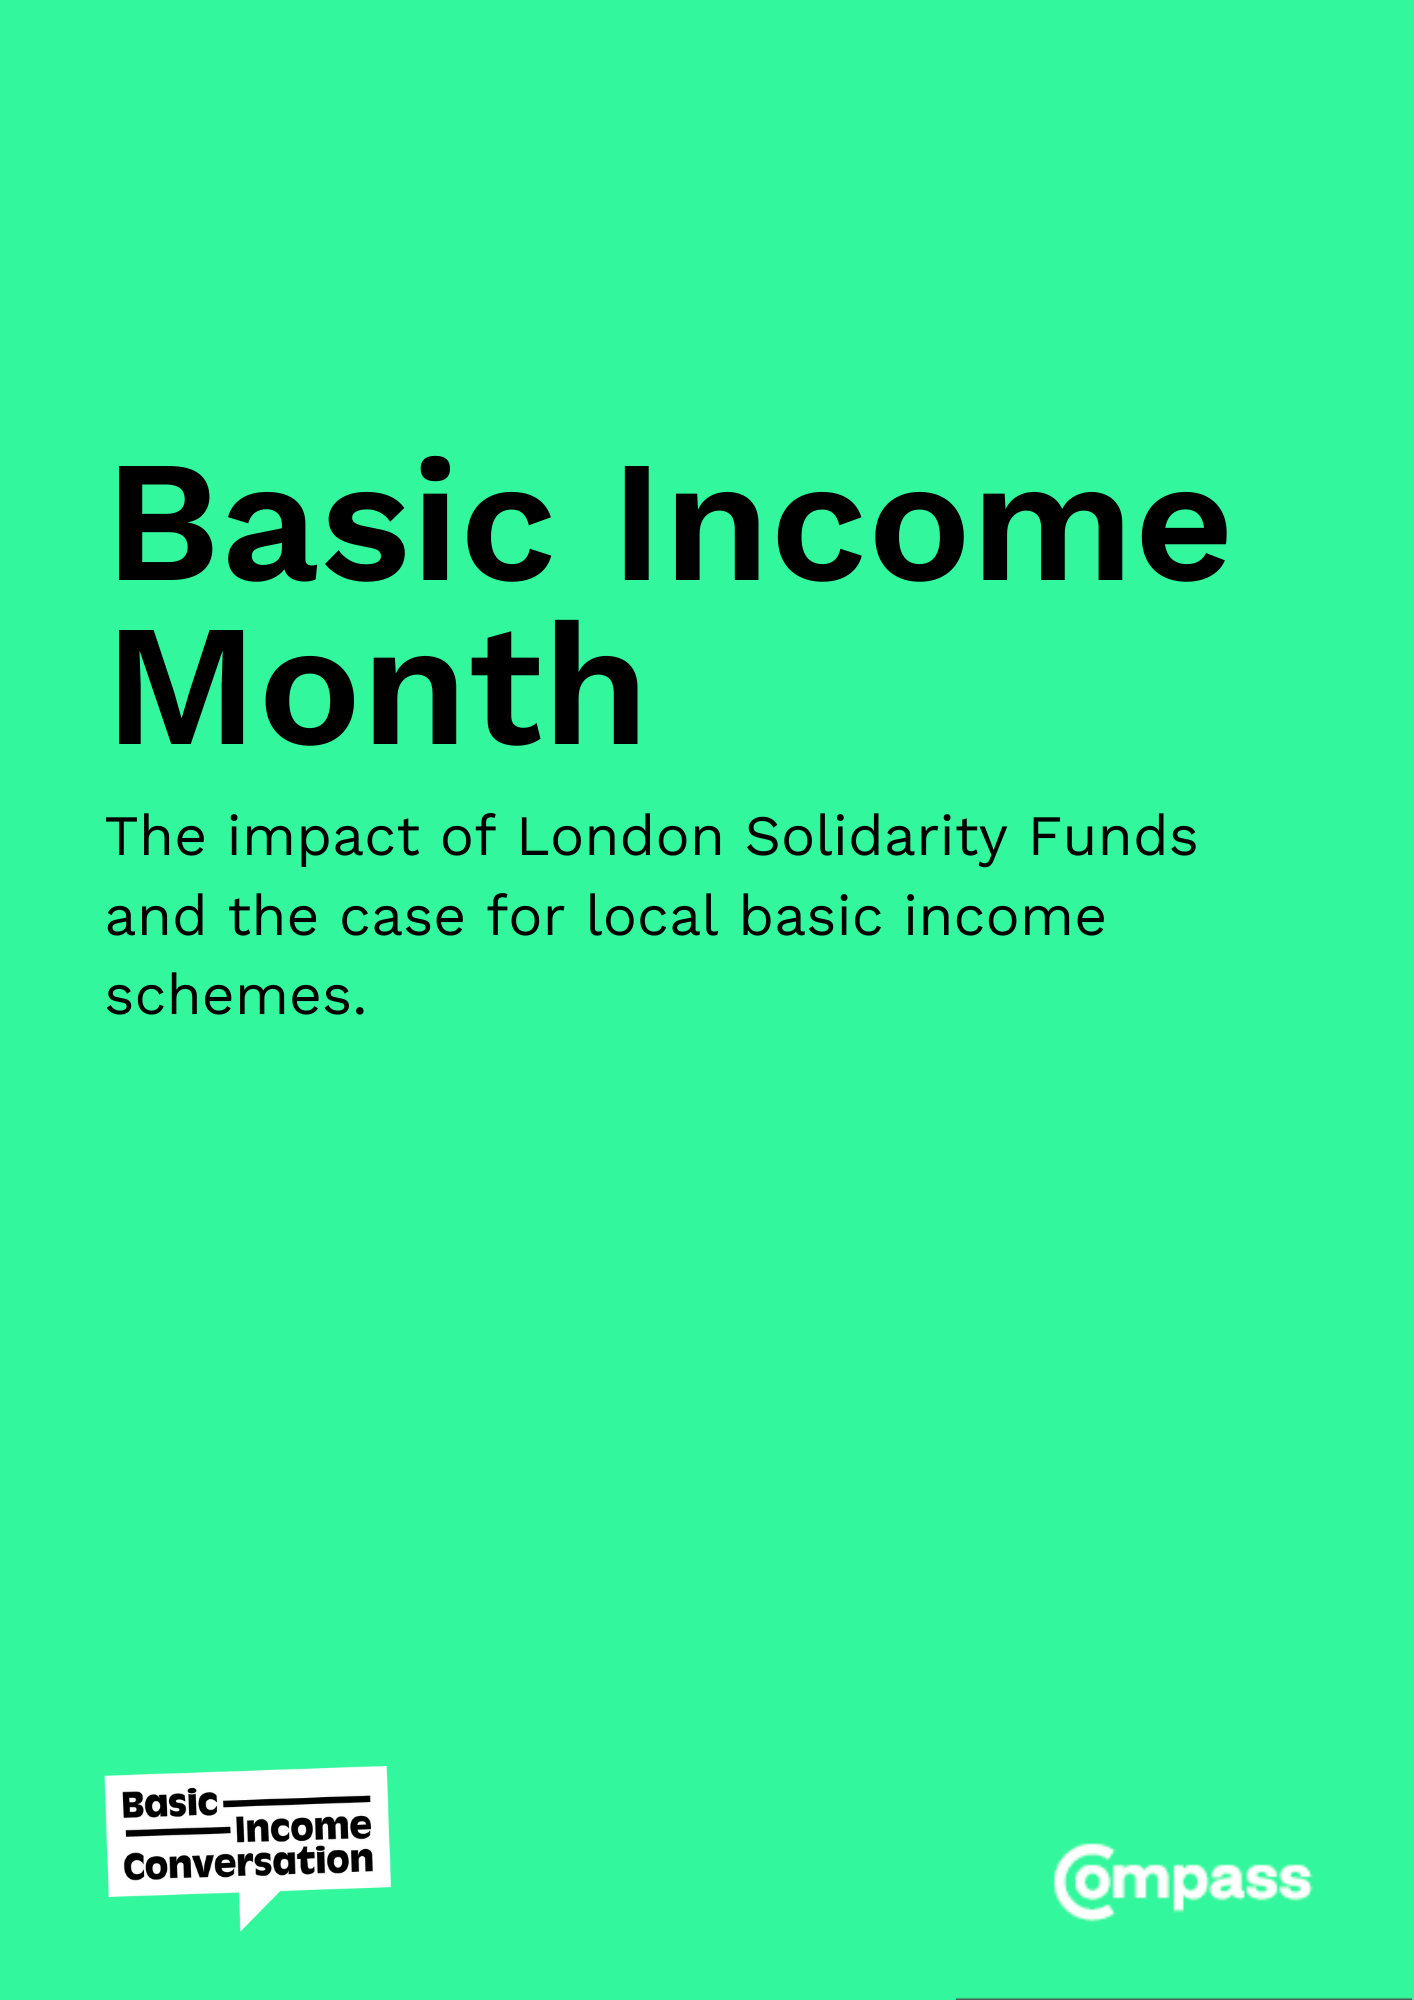 Basic Income Month report